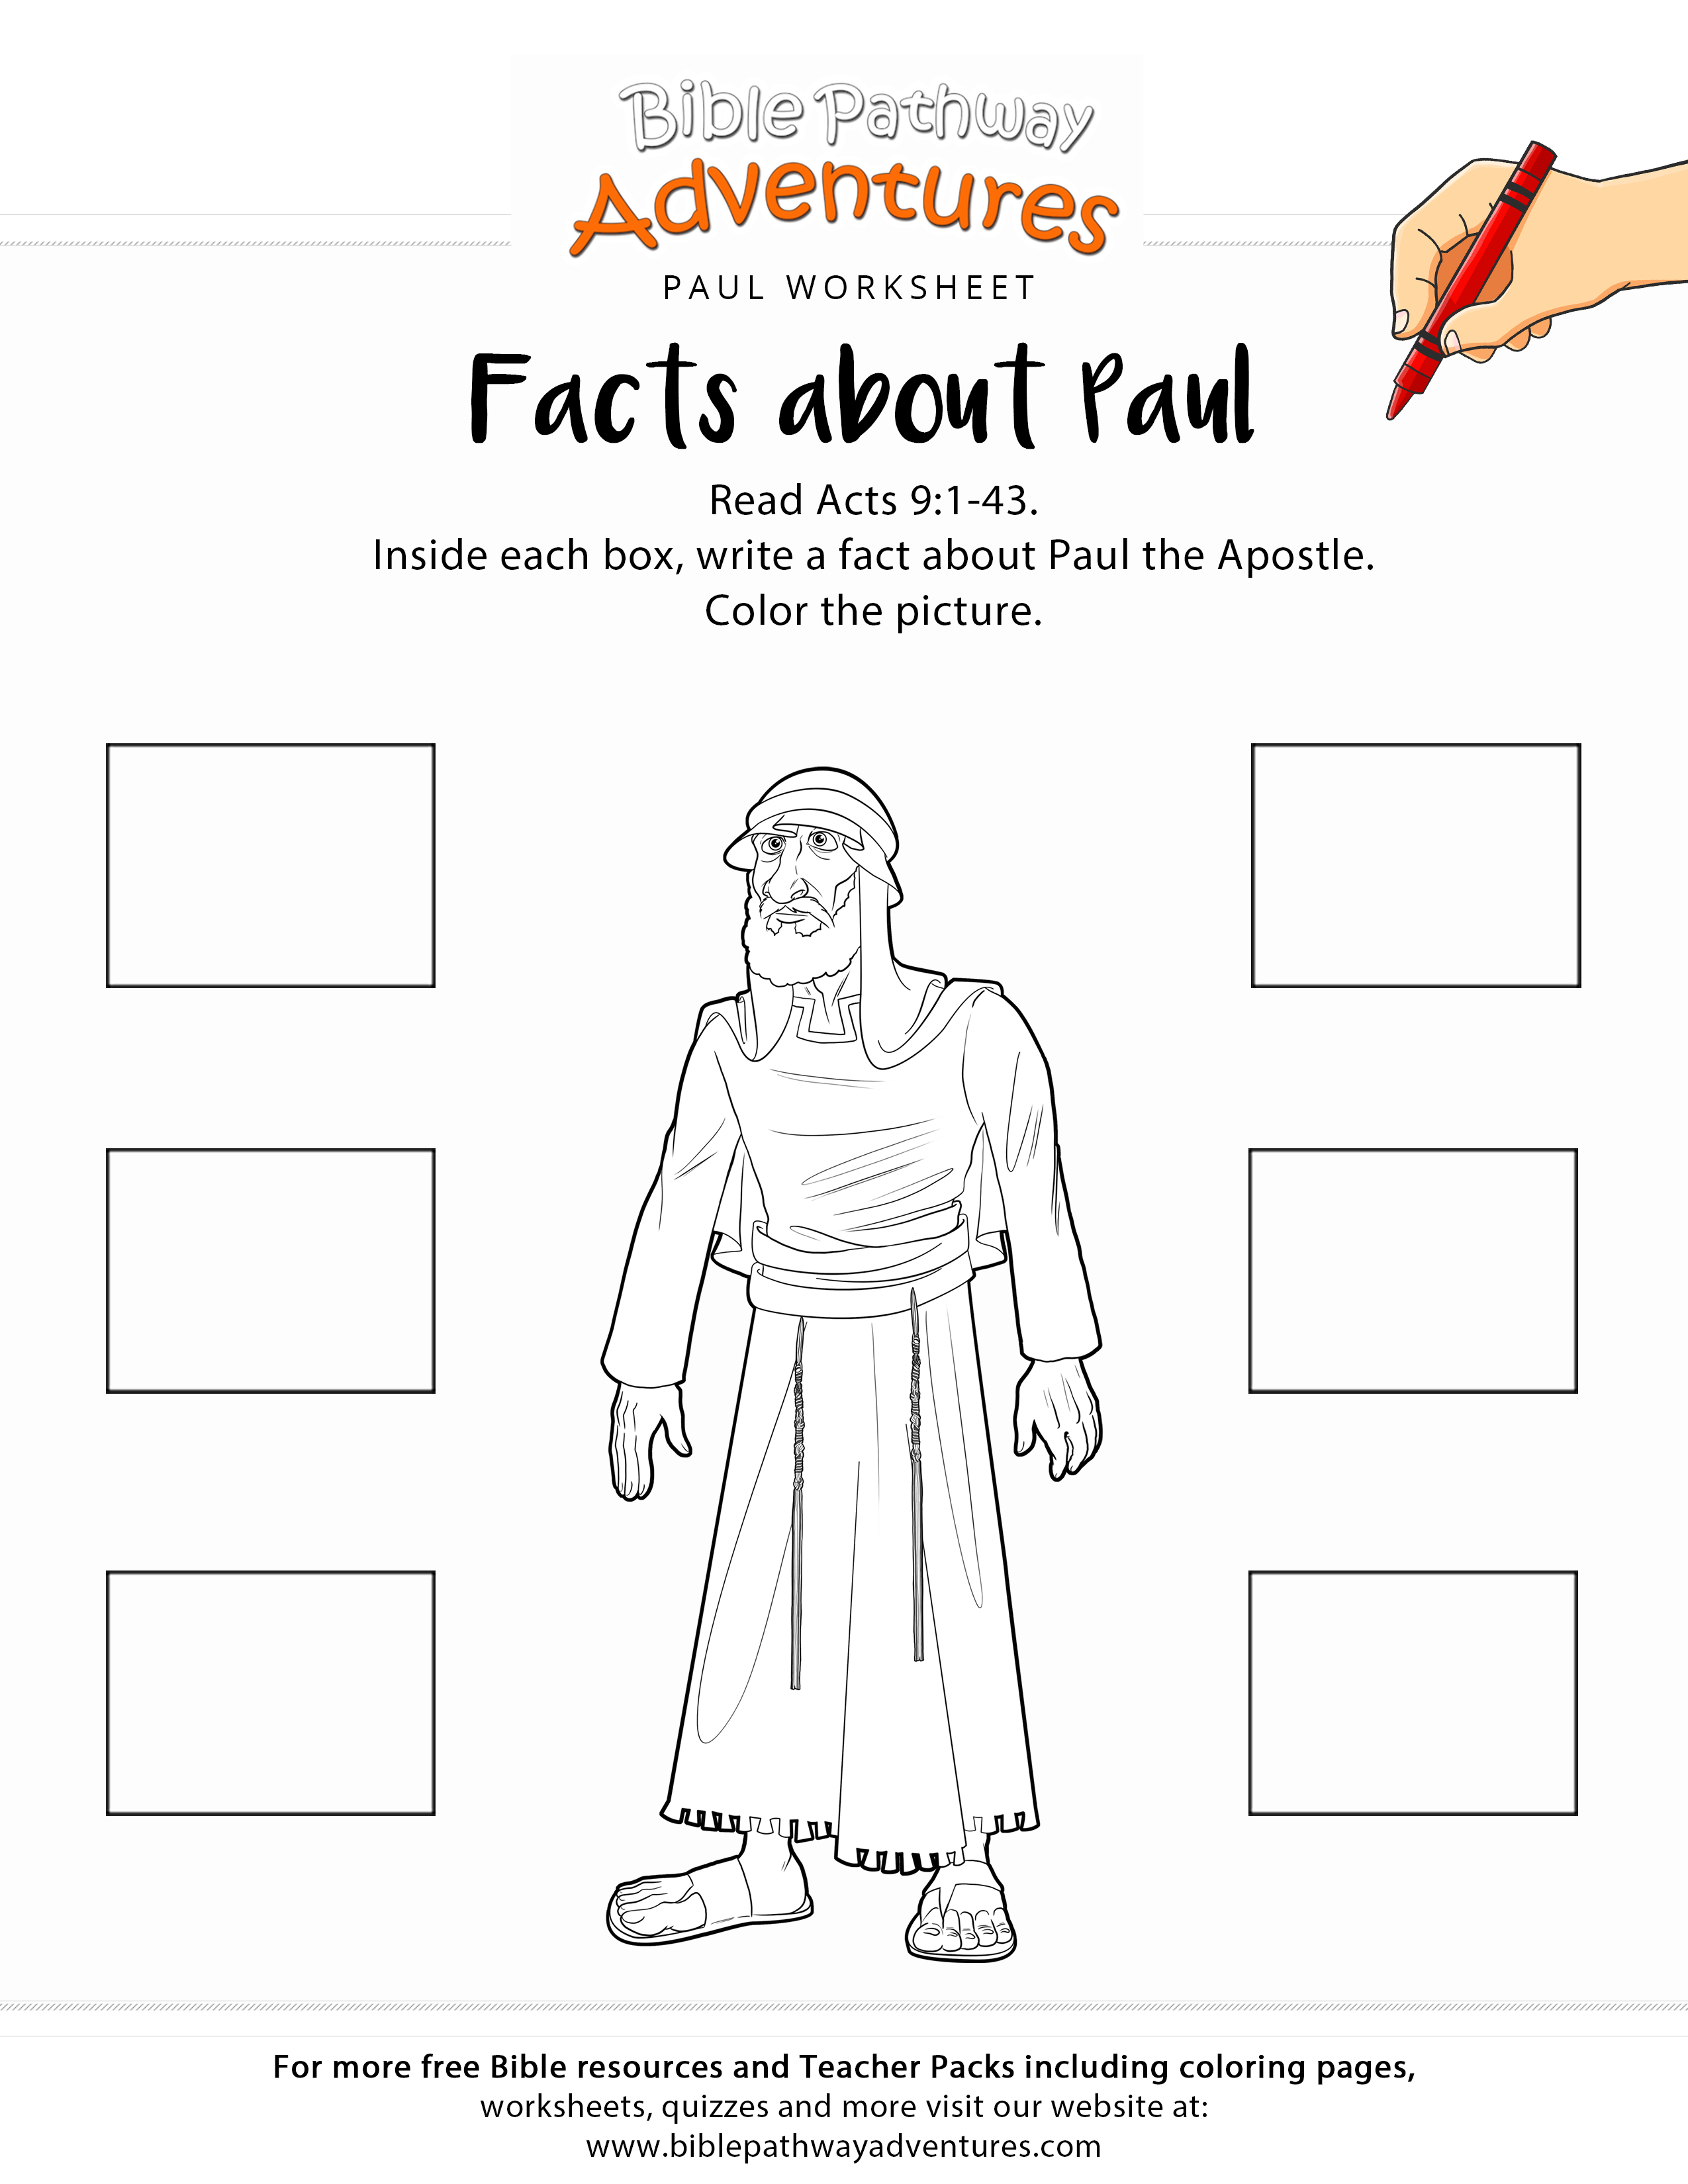 Facts About Paul Printable Bible Worksheet | Adventure Zone | Bible - Printable Bible Crossword Puzzle The Apostle Paul Answers